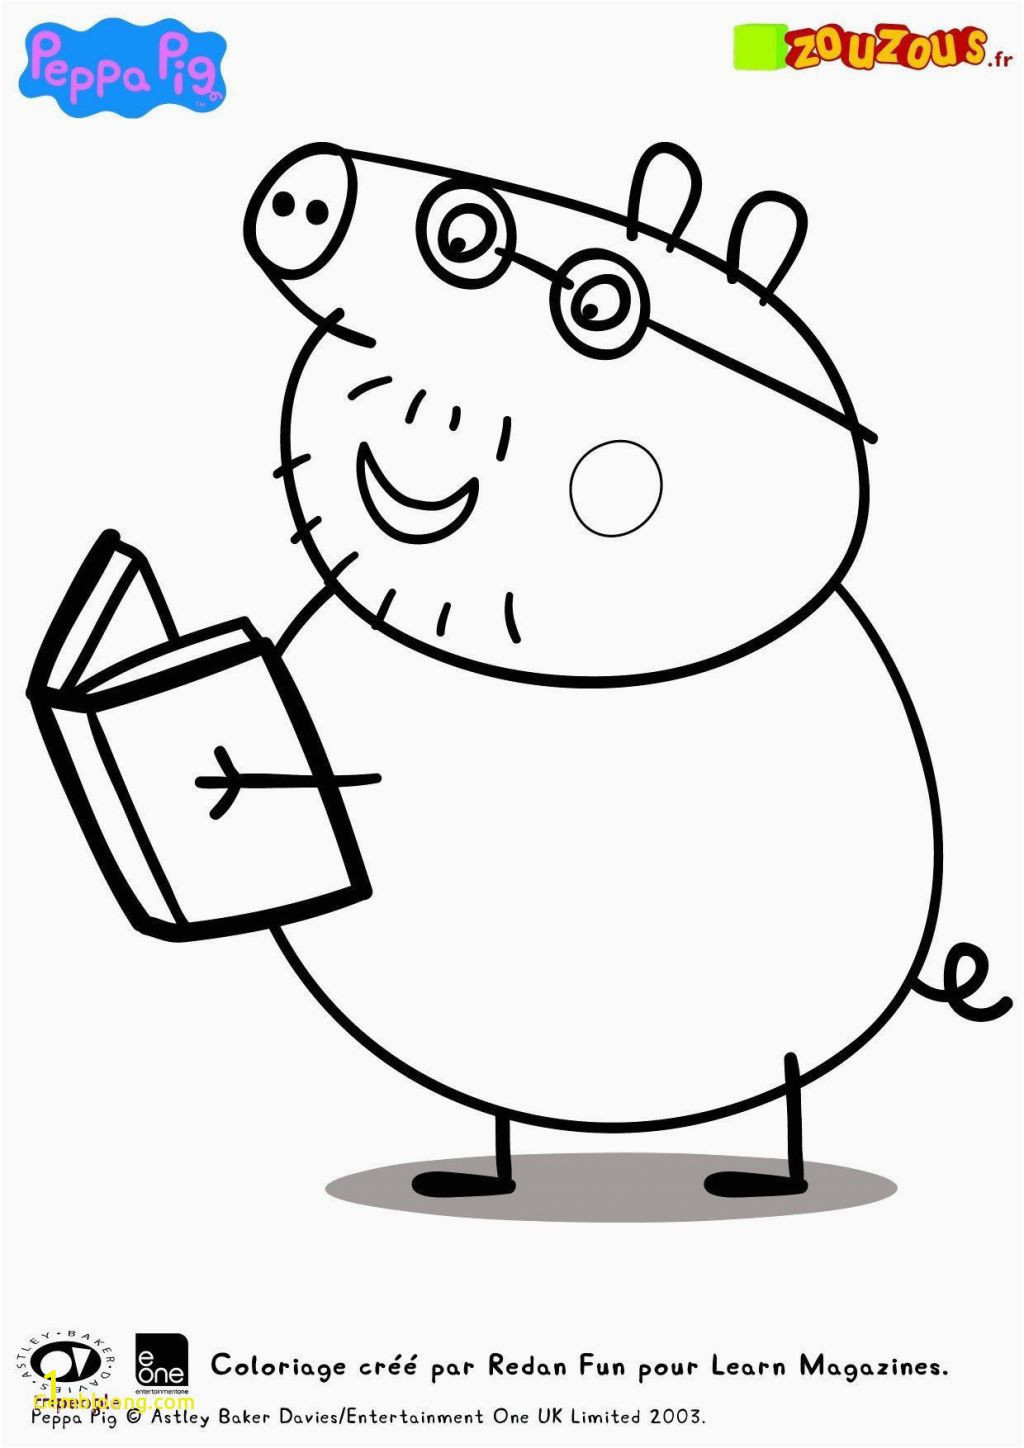 Coloring Pages Hello Kitty Halloween Coloring Pages Childrens Halloween Coloring Pages